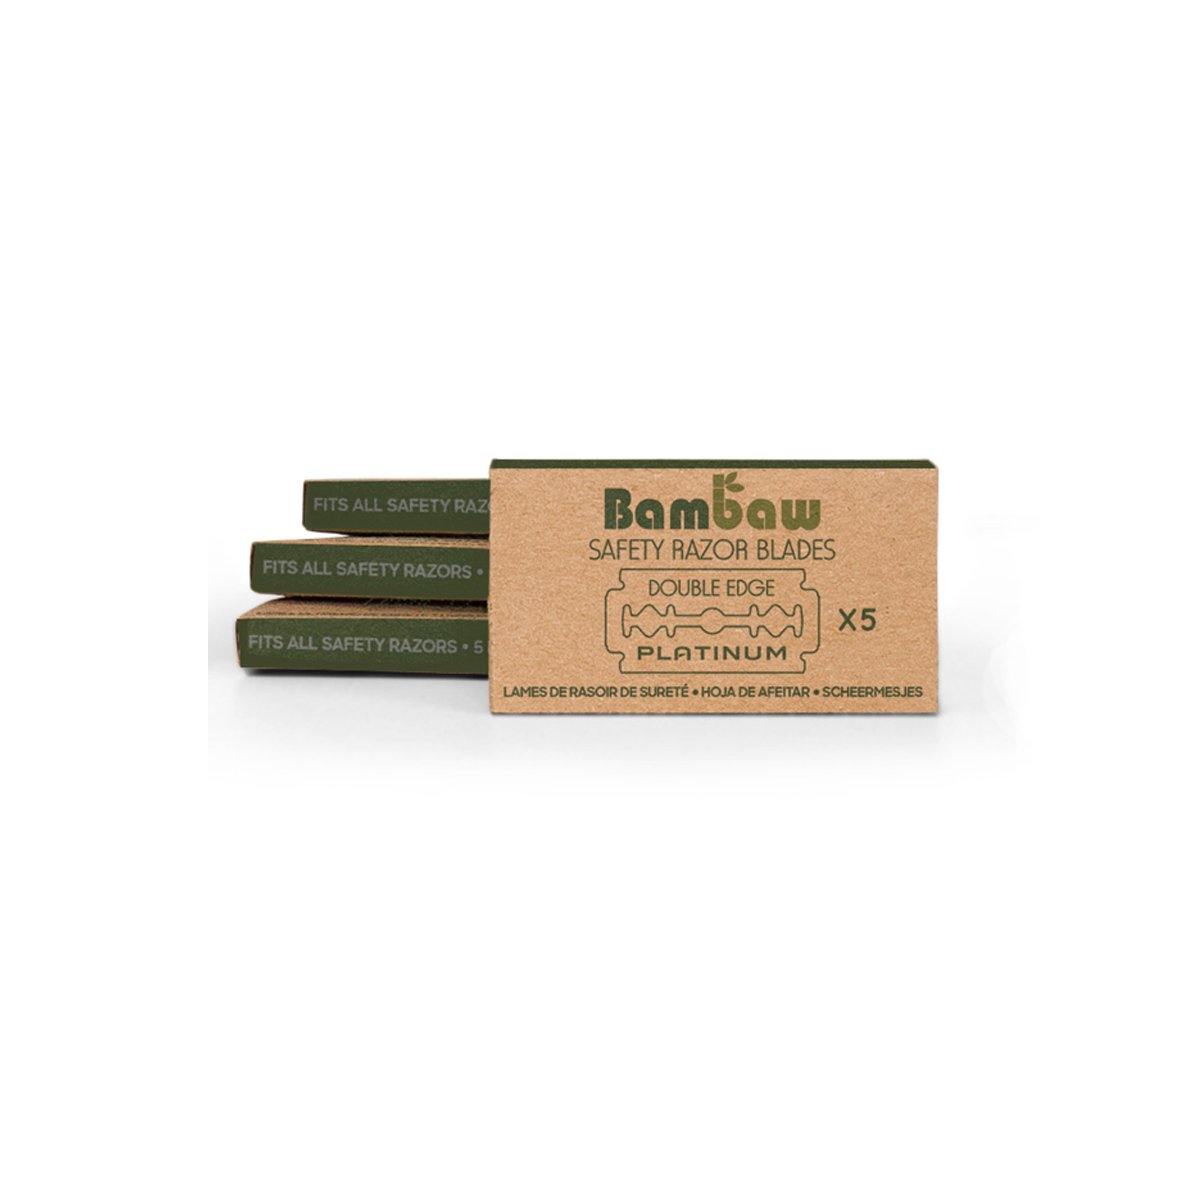 Bambaw Razor Blades with Packaging